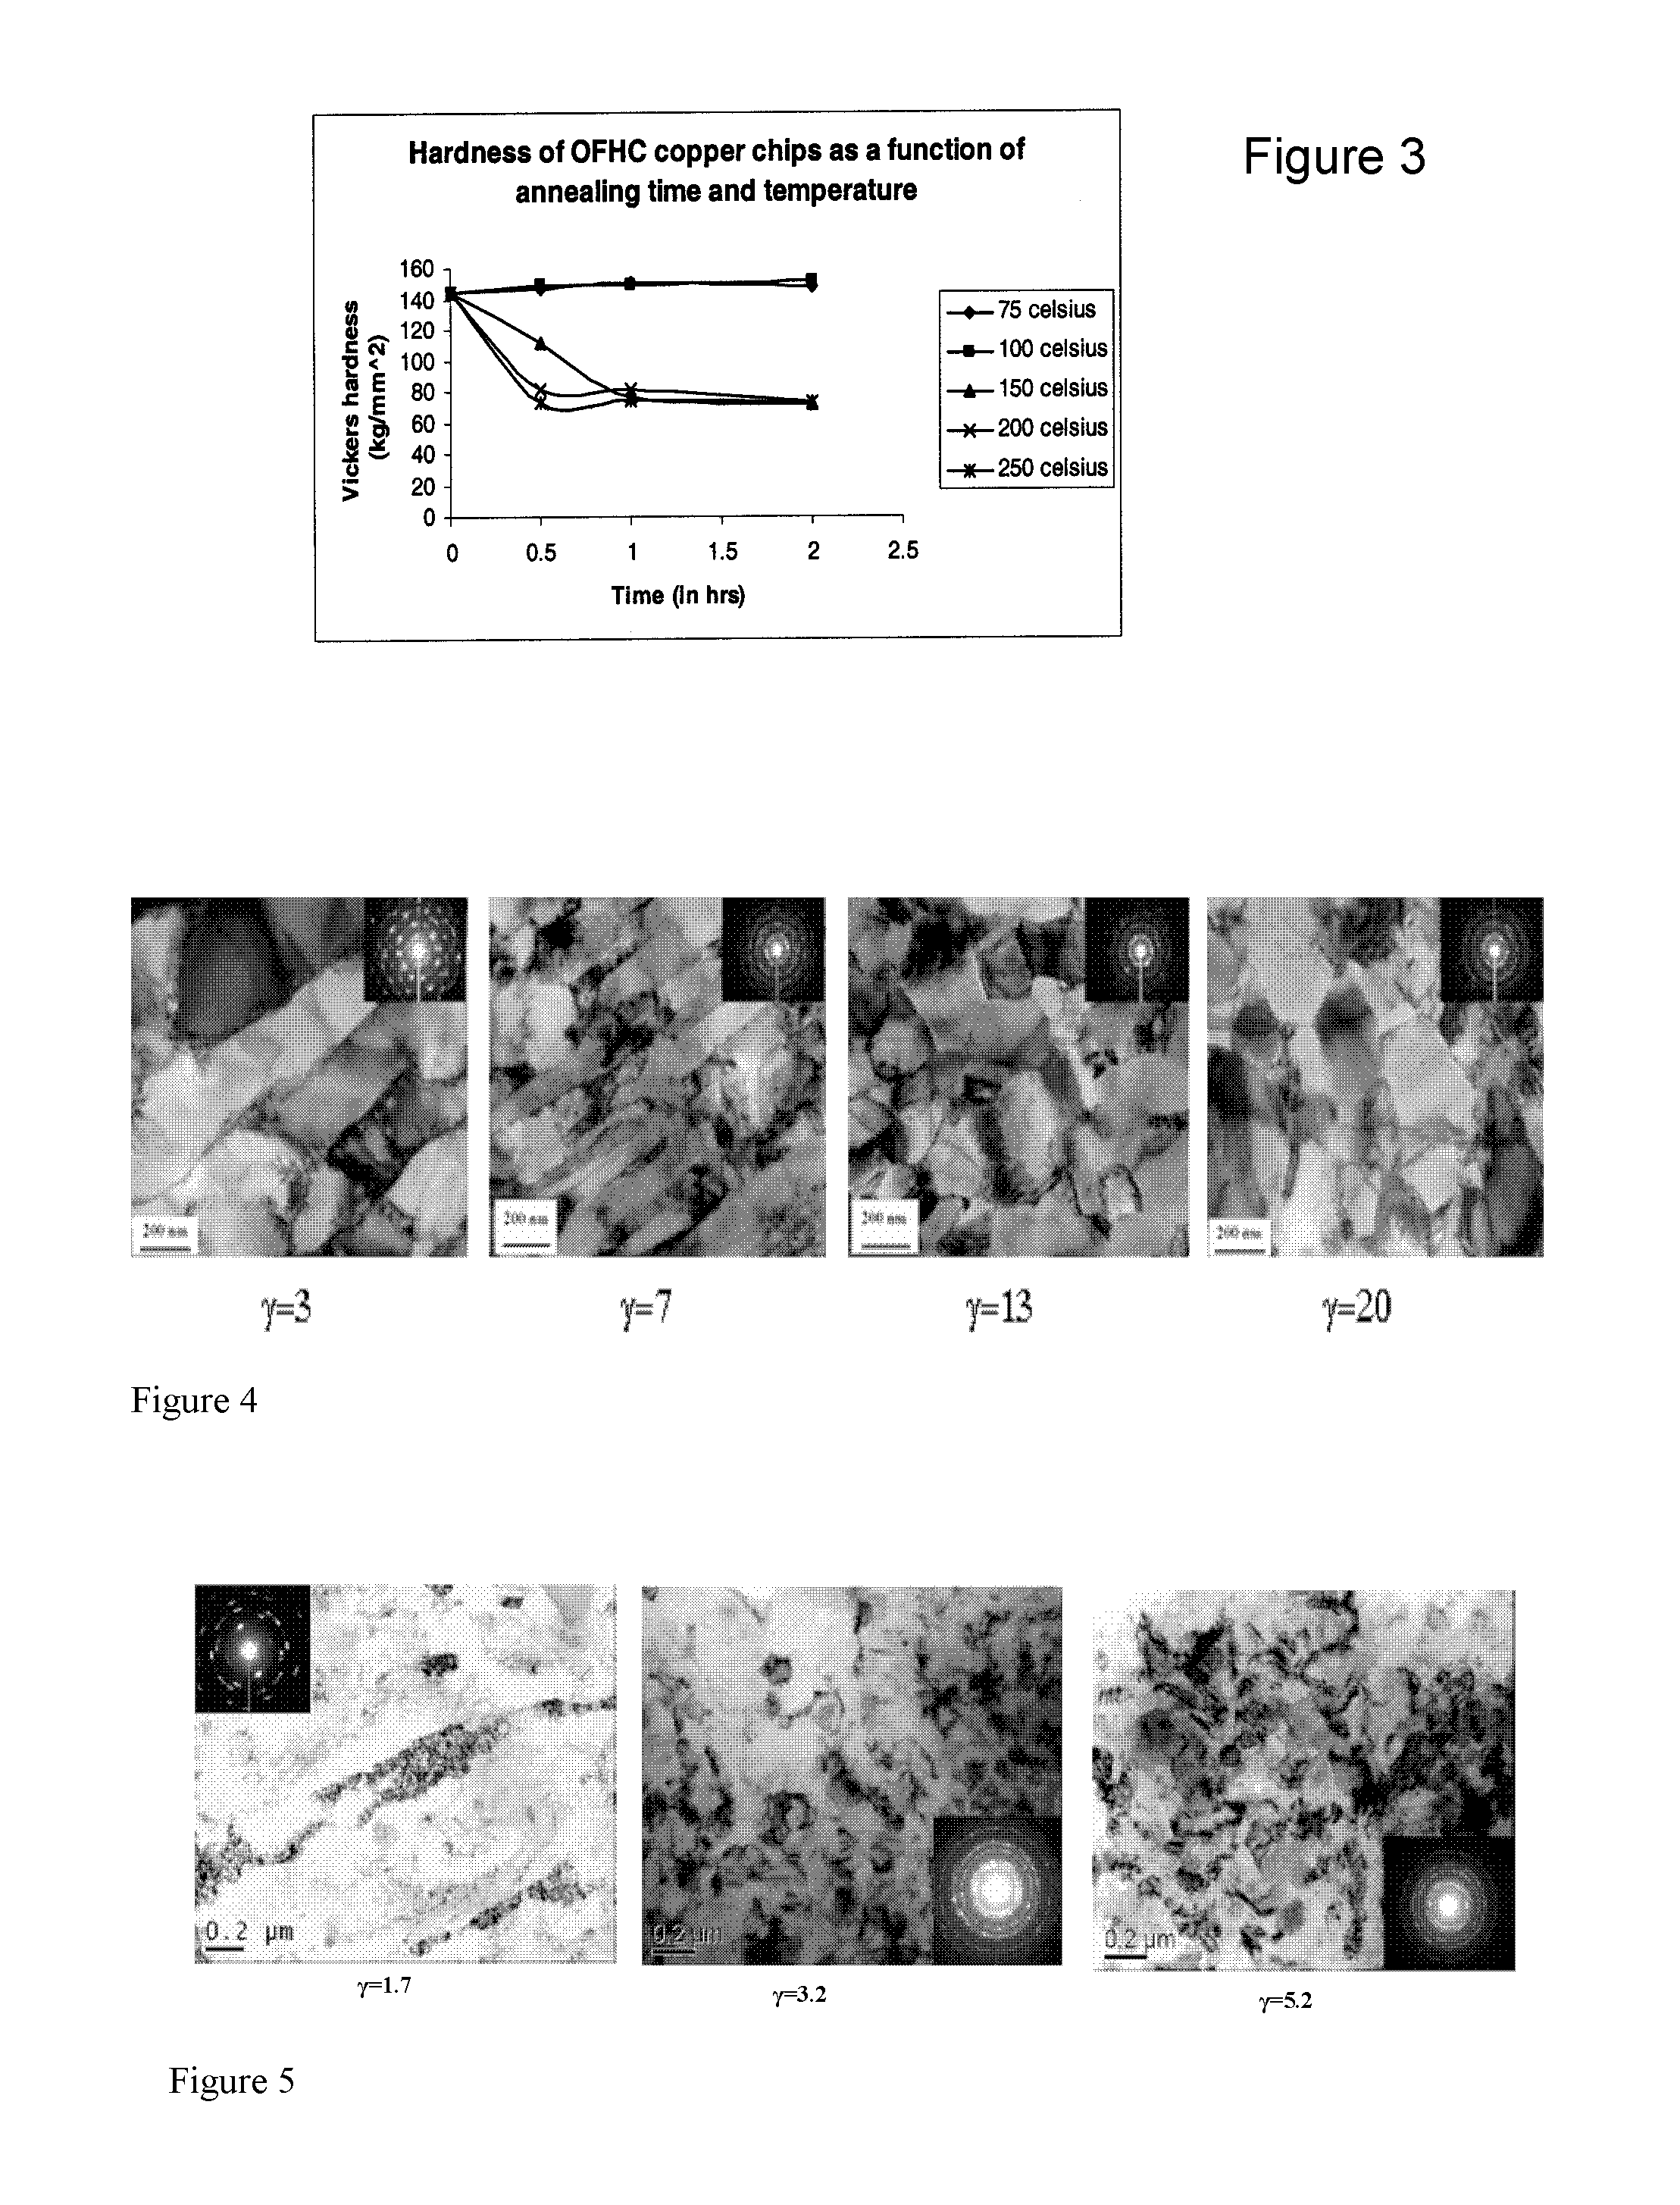 Method of consolidating precipitation-hardenable alloys to form consolidated articles with ultra-fine grain microstructures